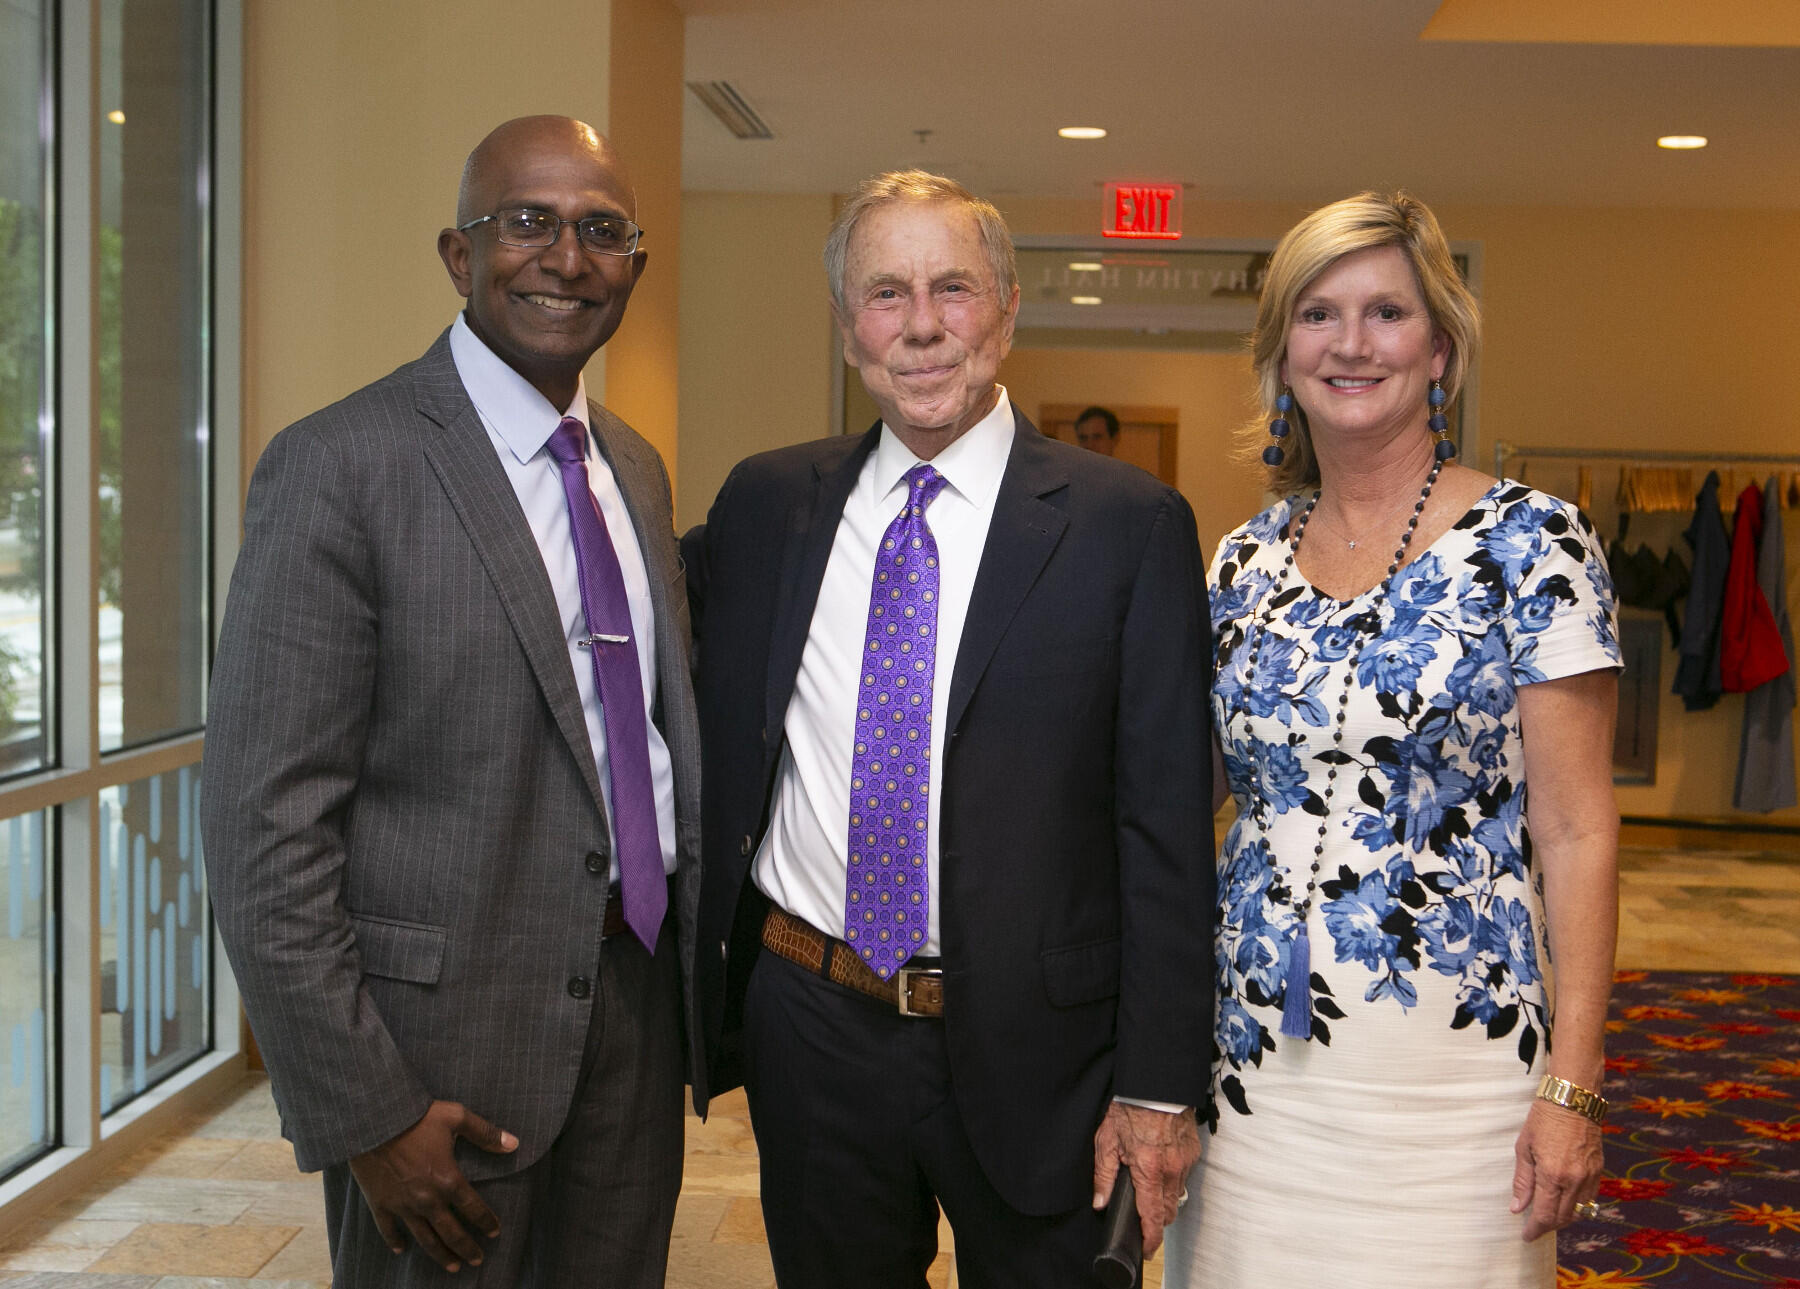 From left: Vigneshwar Kasirajan, M.D., chair of the VCU Department of Surgery; Christine and David Cottrell. (Courtesy photo)